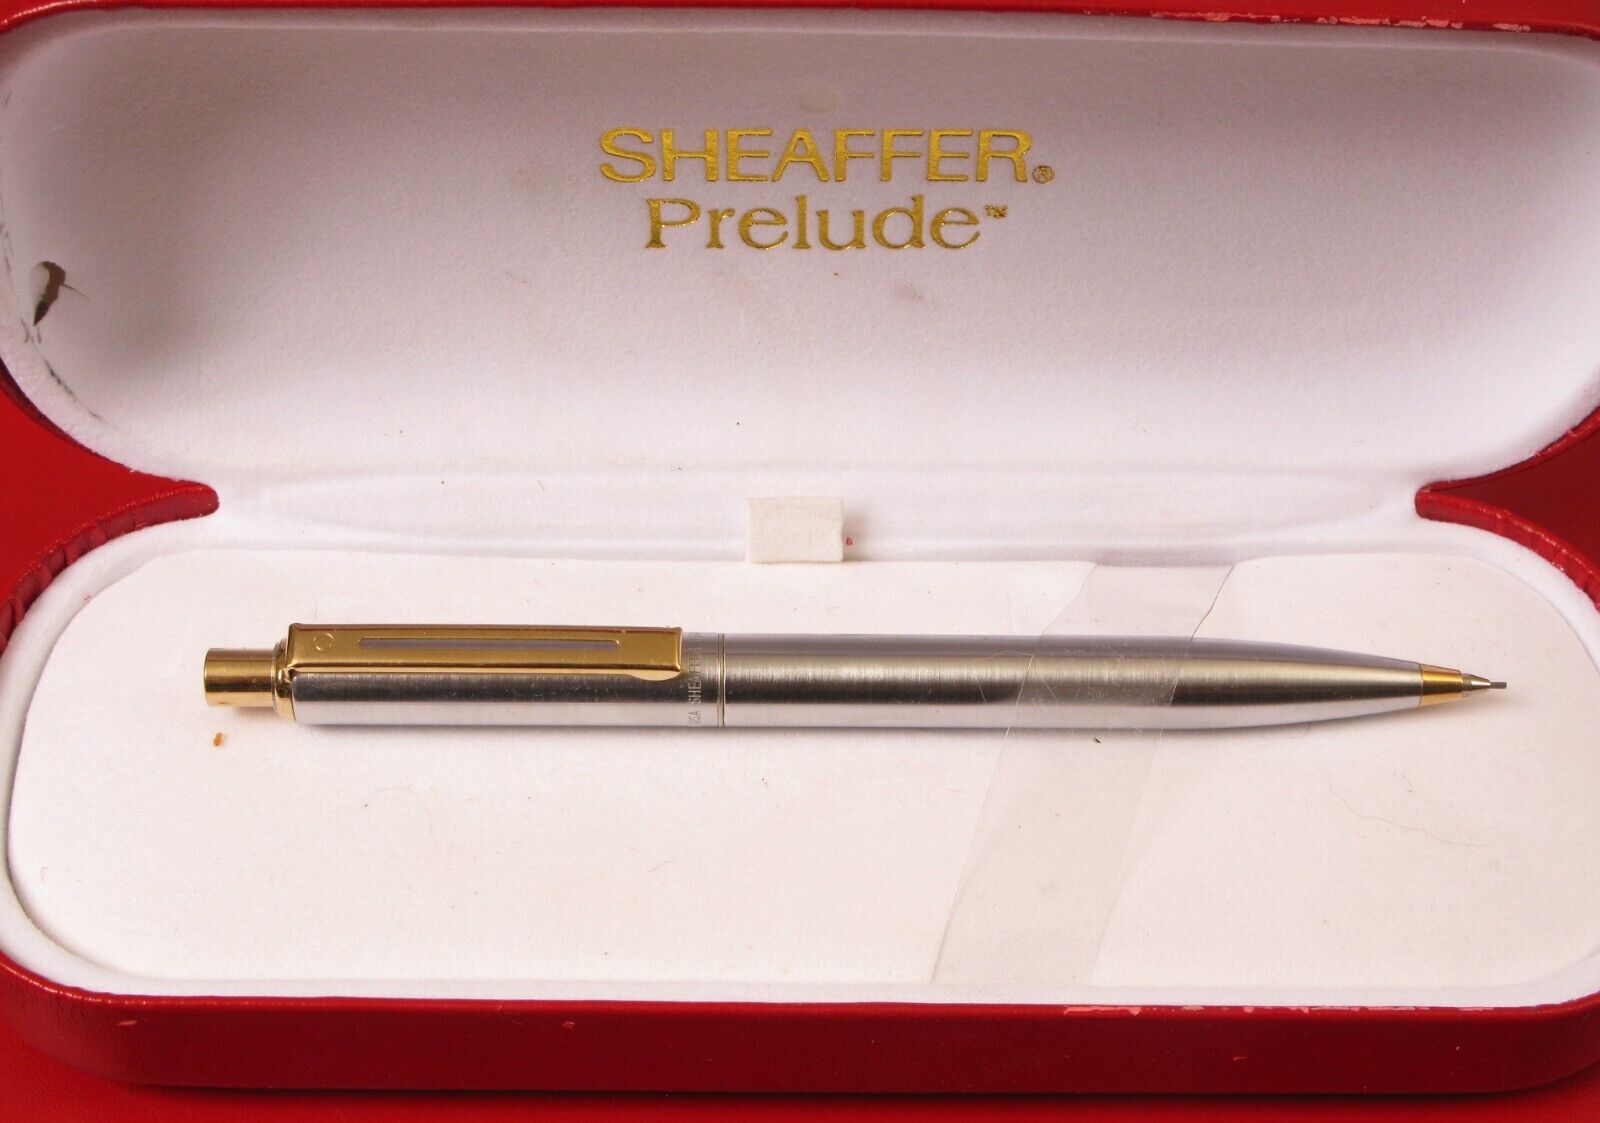 SHEAFFER PRELUDE MECHANICAL SILVER GOLD TONE PENCIL IN RED BOX CASE 